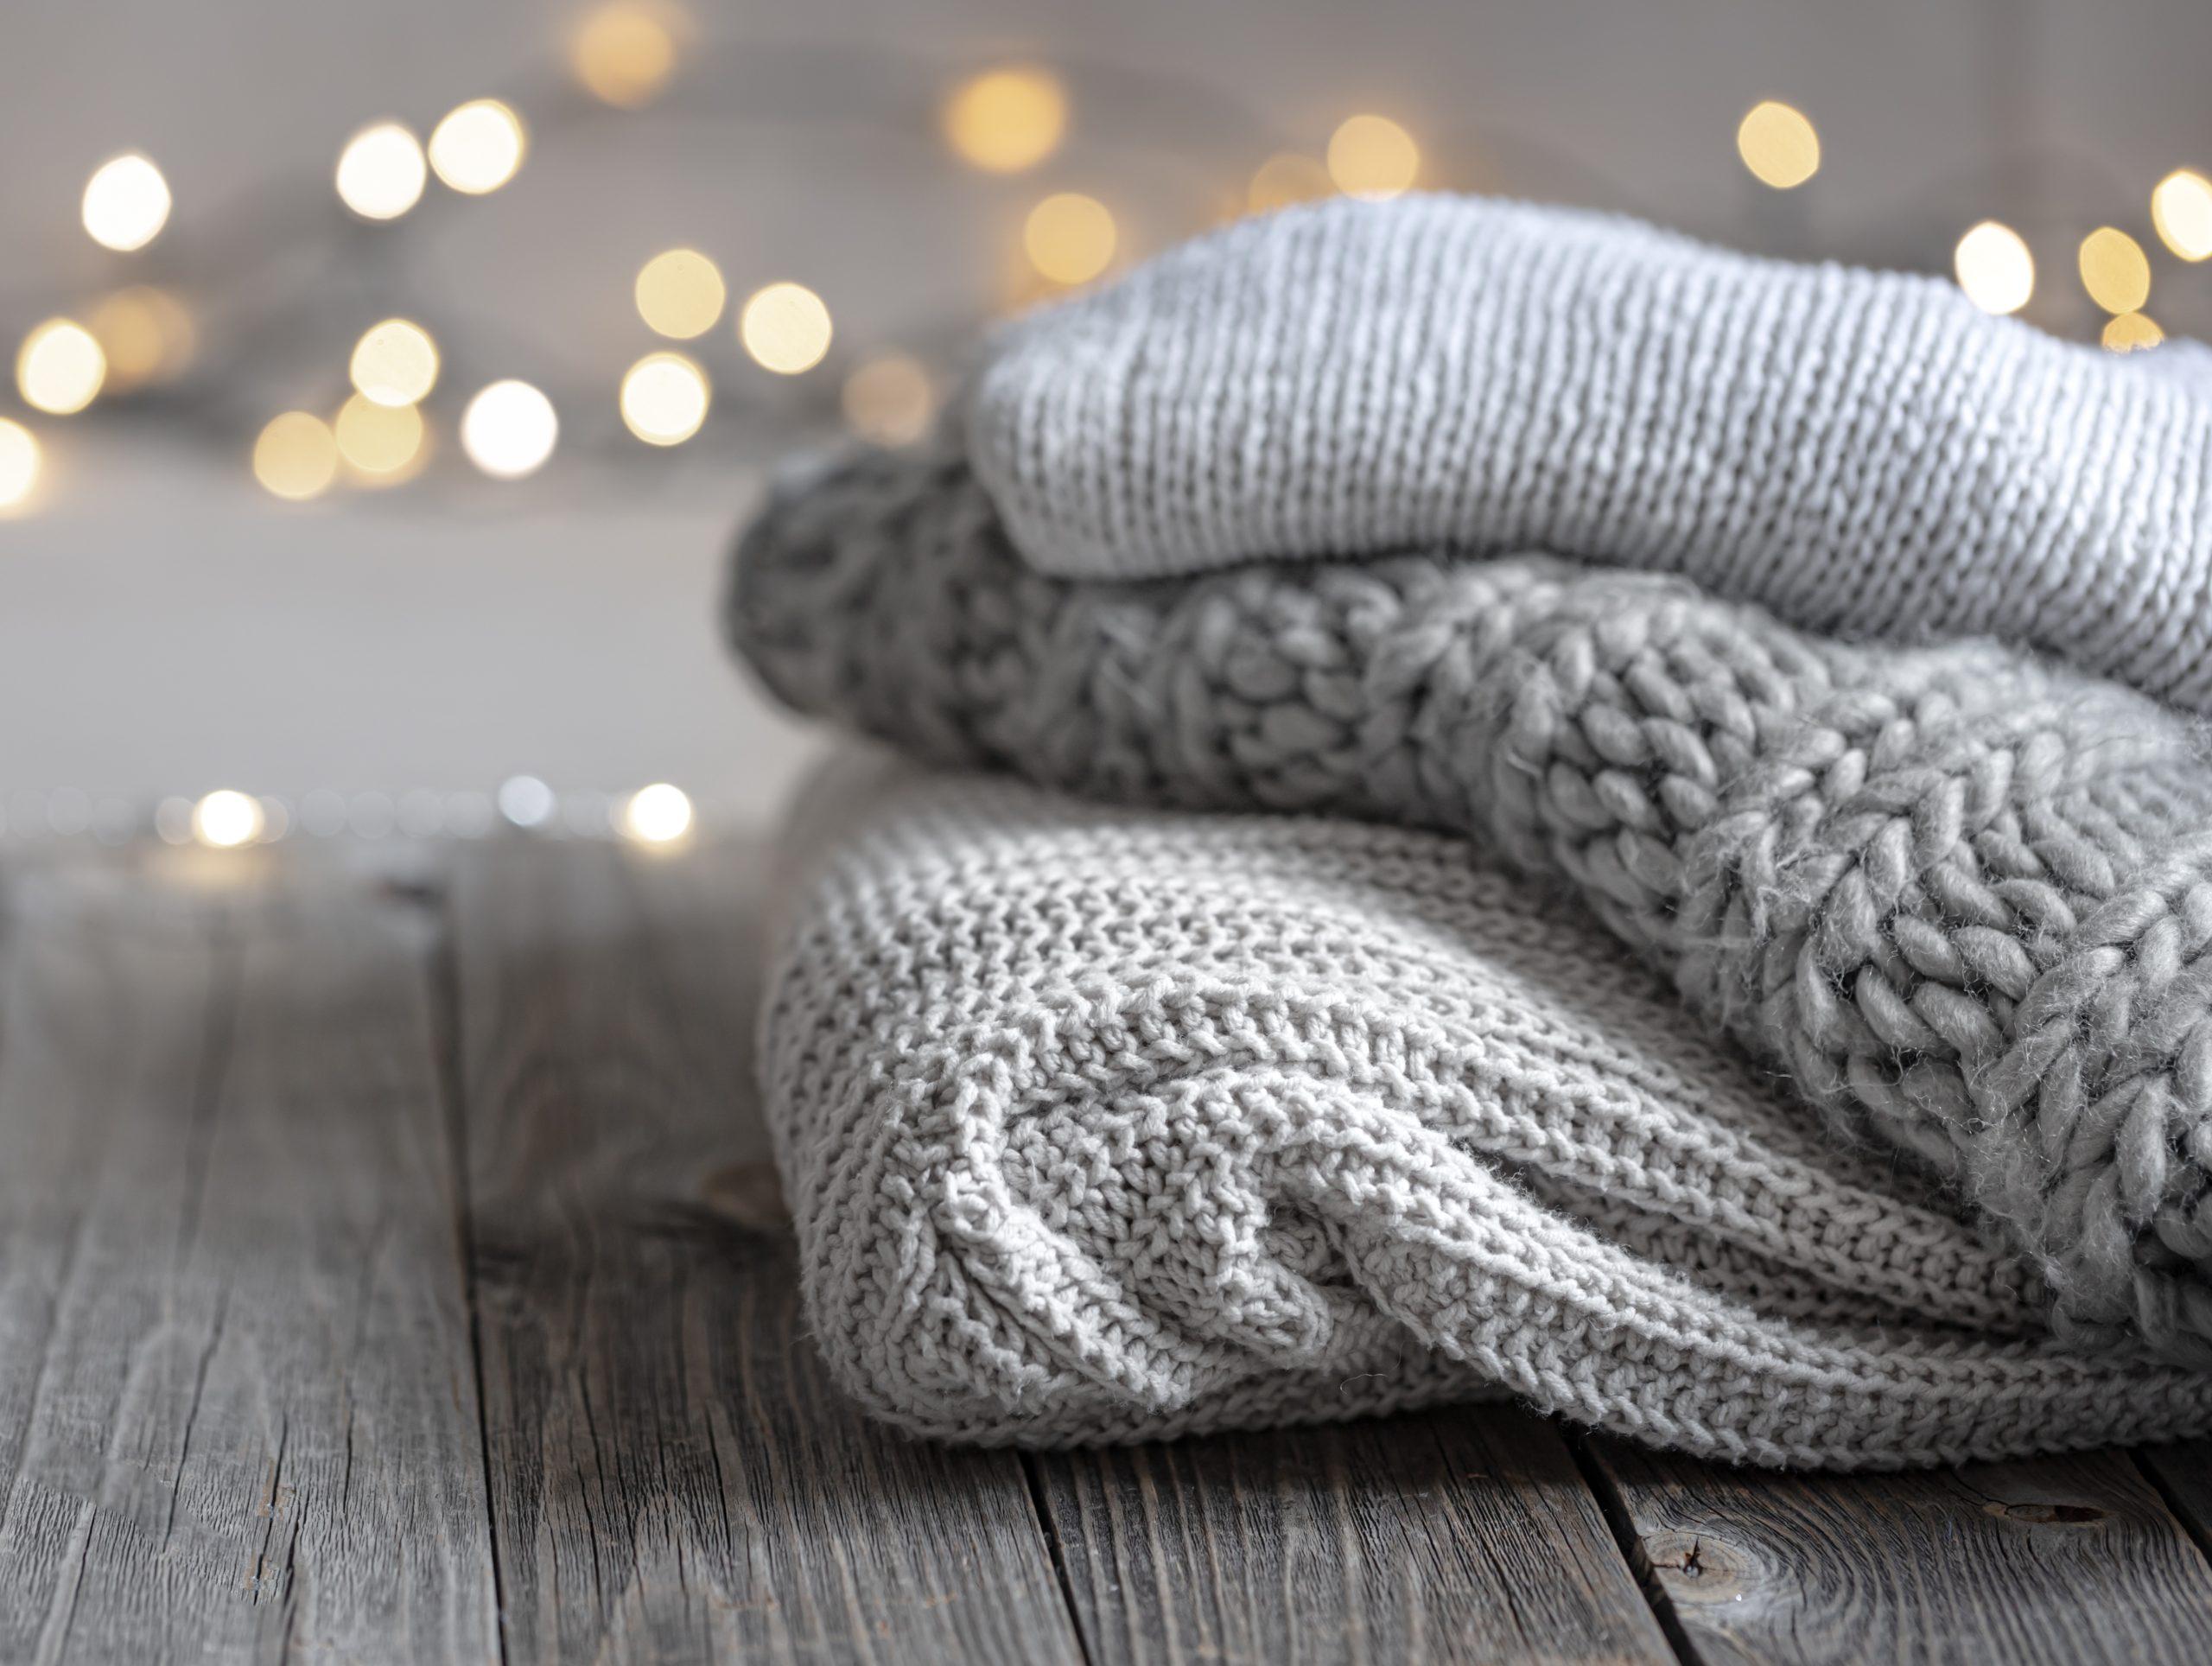 Cozy winter background with a stack of knitted sweaters and lights,